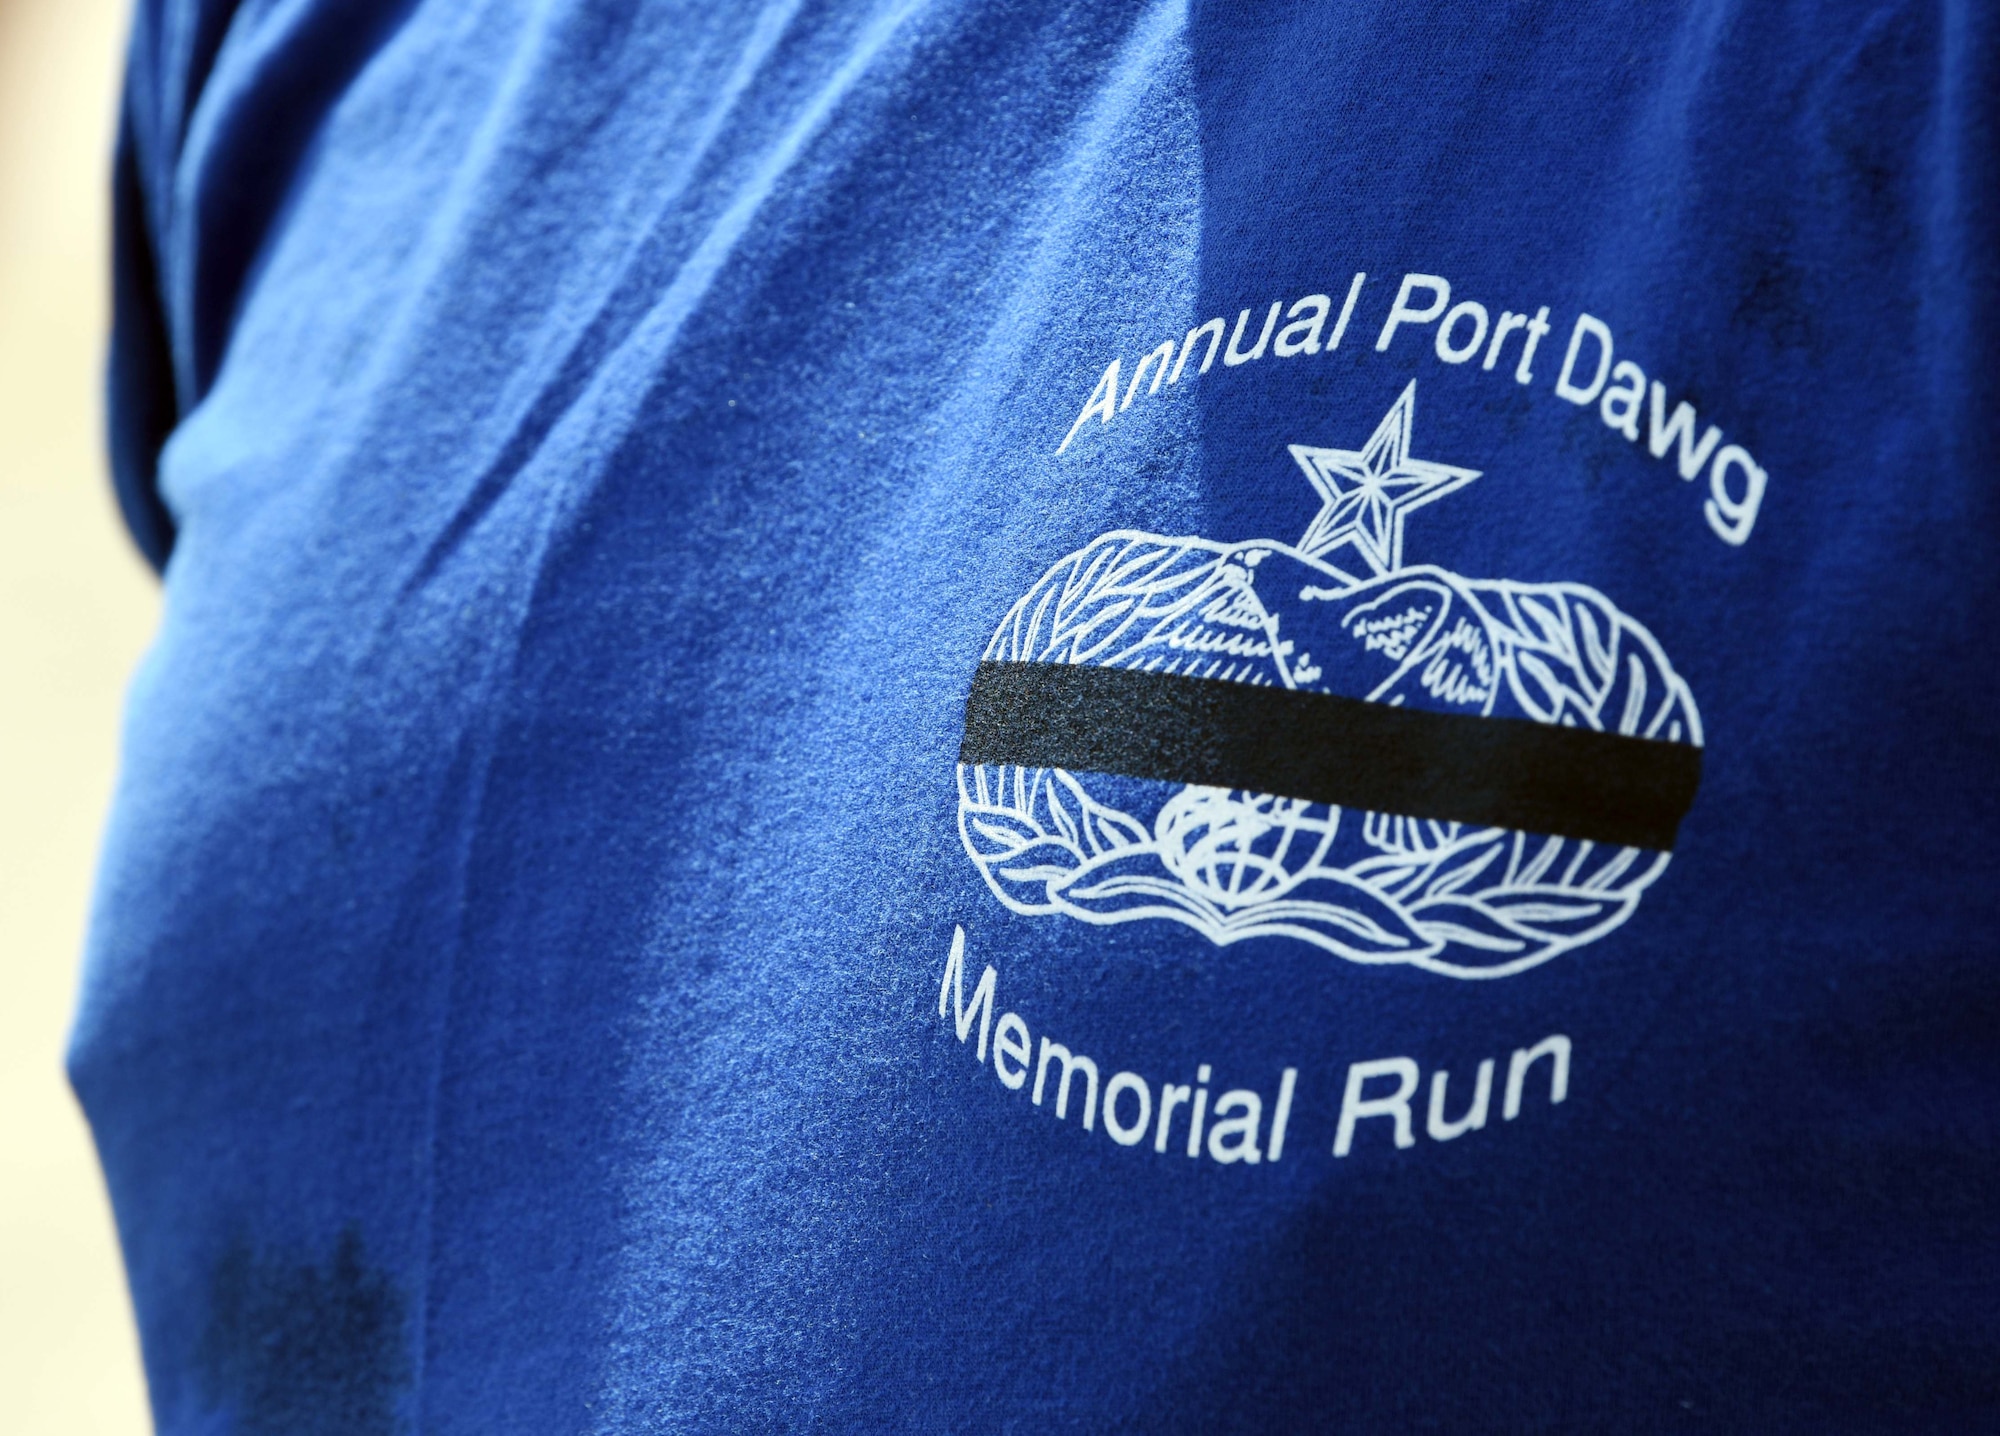 The 727th Air Mobility Squadron participated in the annual Port Dawg Memorial Run at RAF Mildenhall, England, May 15, 2020. The Port Dawg Memorial Run is an annual event that is career field-wide for air transportation Airmen and is held at aerial ports around the world during Transportation Week. (U.S. Air Force photo by Senior Airman Brandon Esau)